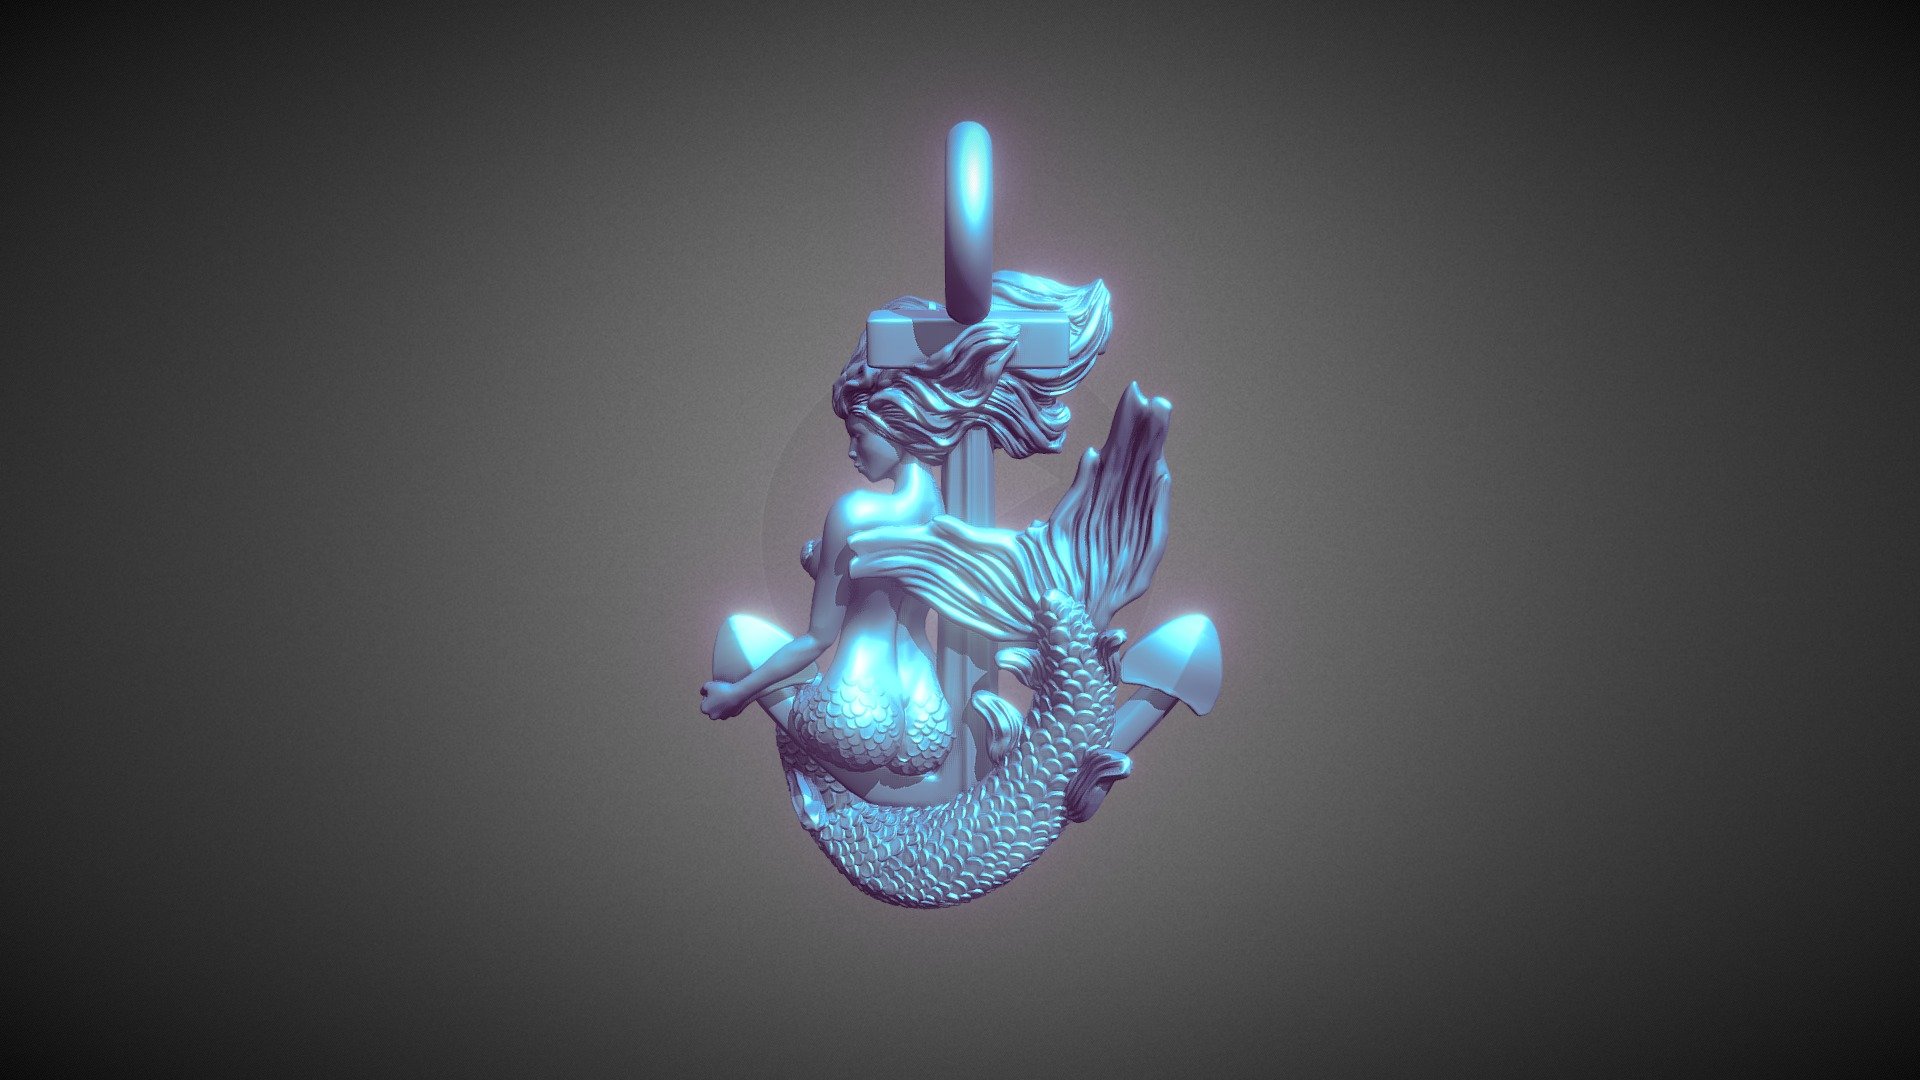 Mermaid Pendant Sculpted in Zbrush 3d printable in Silver http://shpws.me/QA4o - Mermaid Pendant - Buy Royalty Free 3D model by Nello 3d model